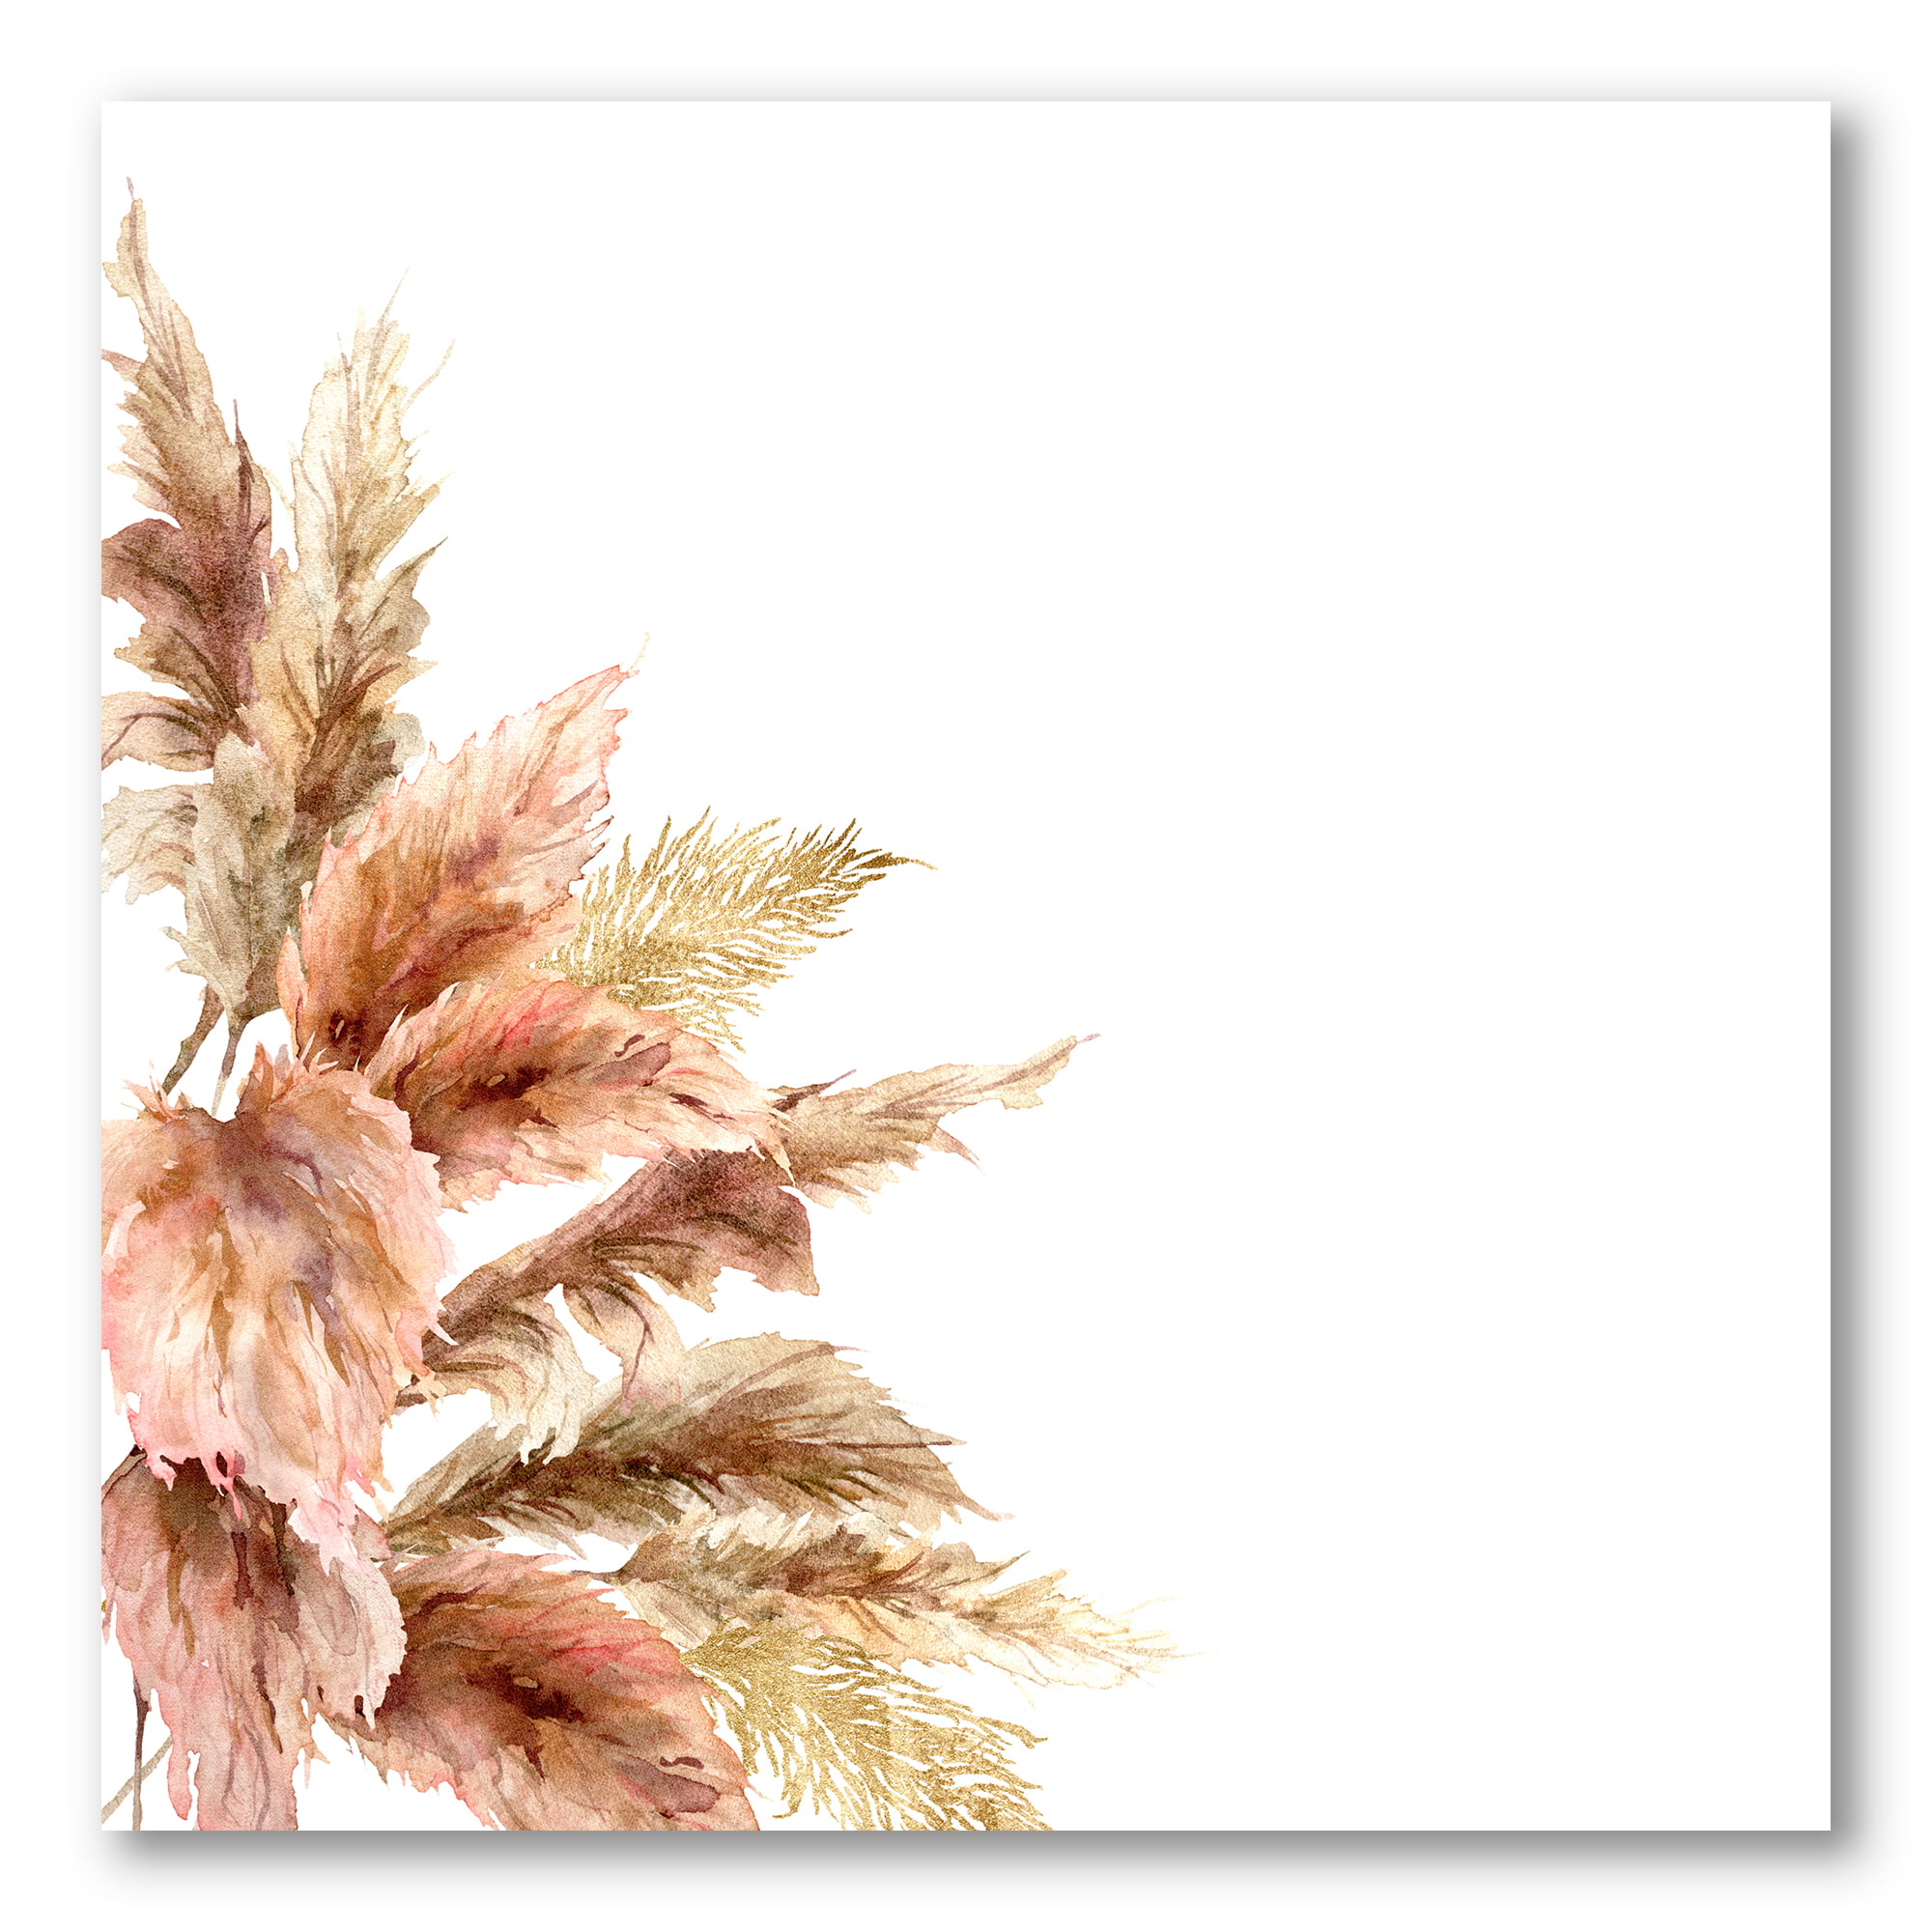 Koyal Wholesale Real Dried Pampas Grass Decor Plumes, 28-32 Inches, White Color, Bulk of 96 Pcs Ornamental Grass